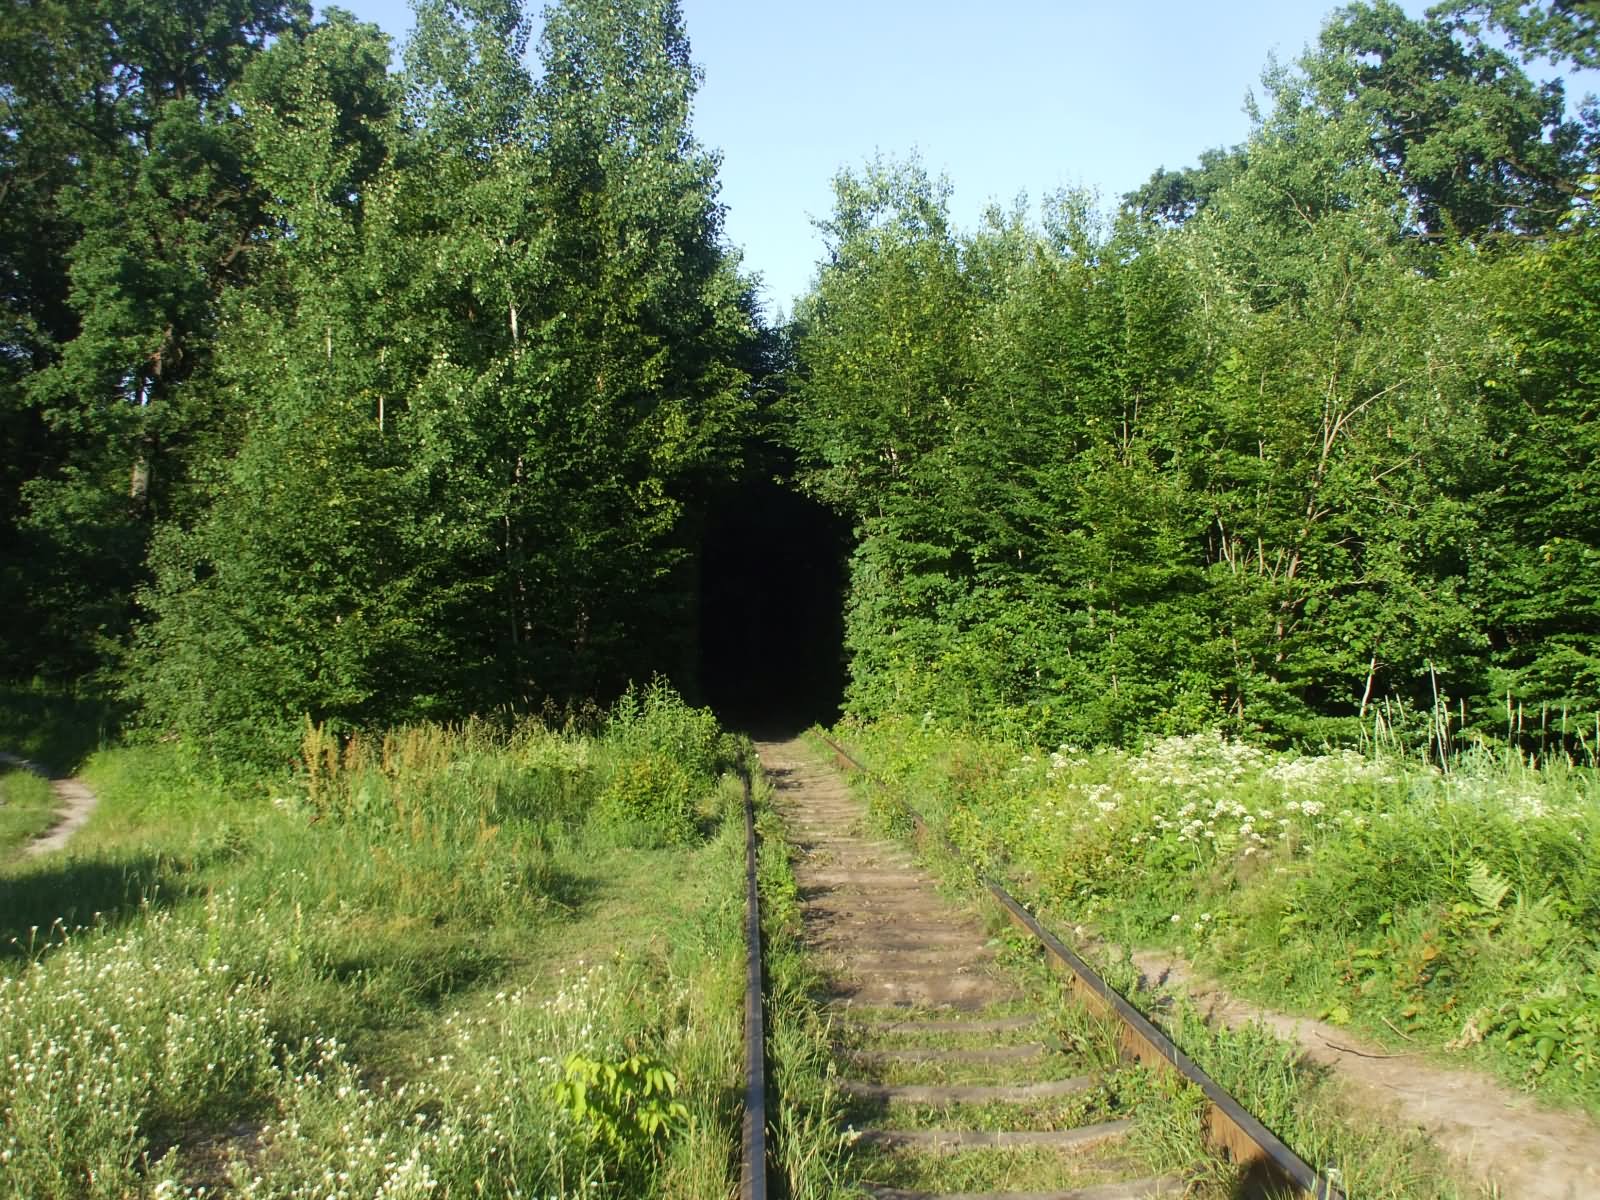 Entrance Way To The Tunnel Of Love In Ukraine